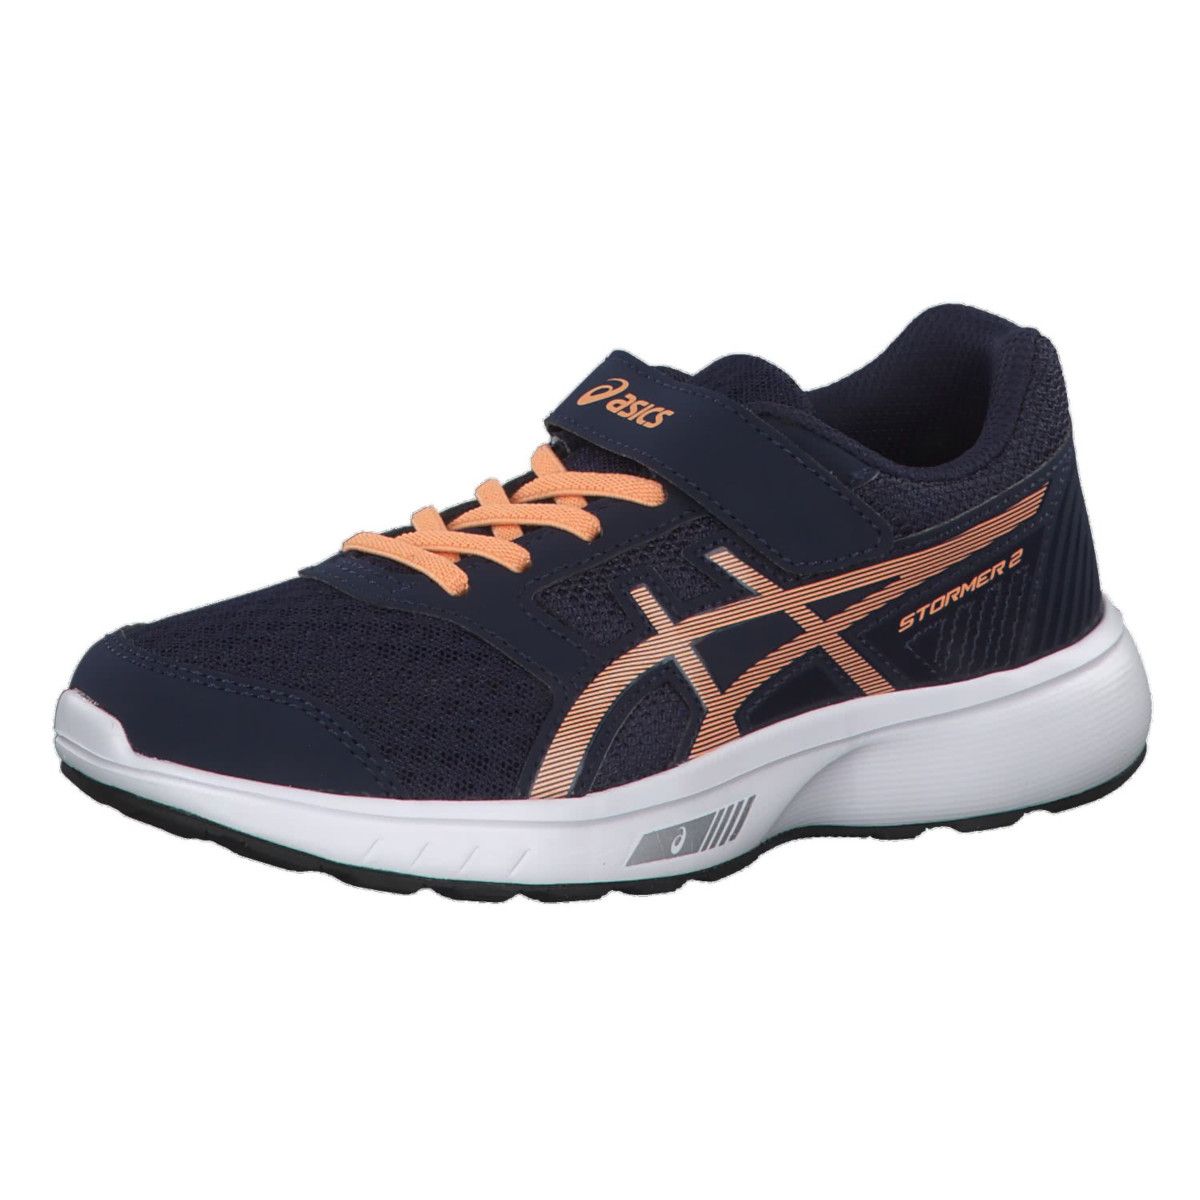 asics stormer 2, heavy deal Hit A 71% Discount - statehouse.gov.sl